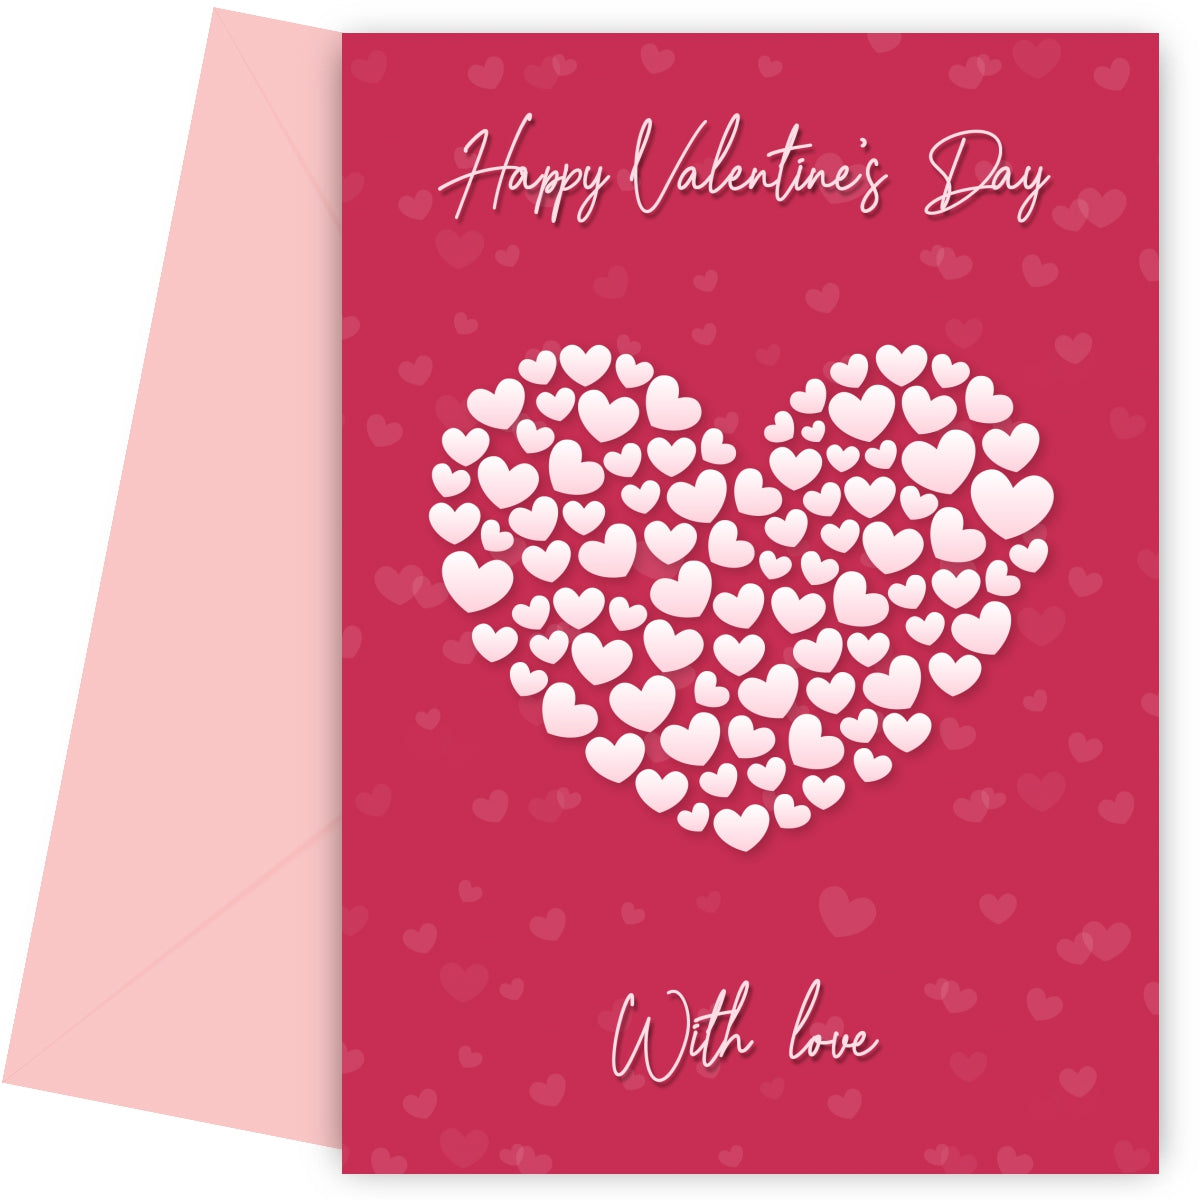 Happy Valentine's Day Card for Girlfriend or Wife - Beautiful Card for Her